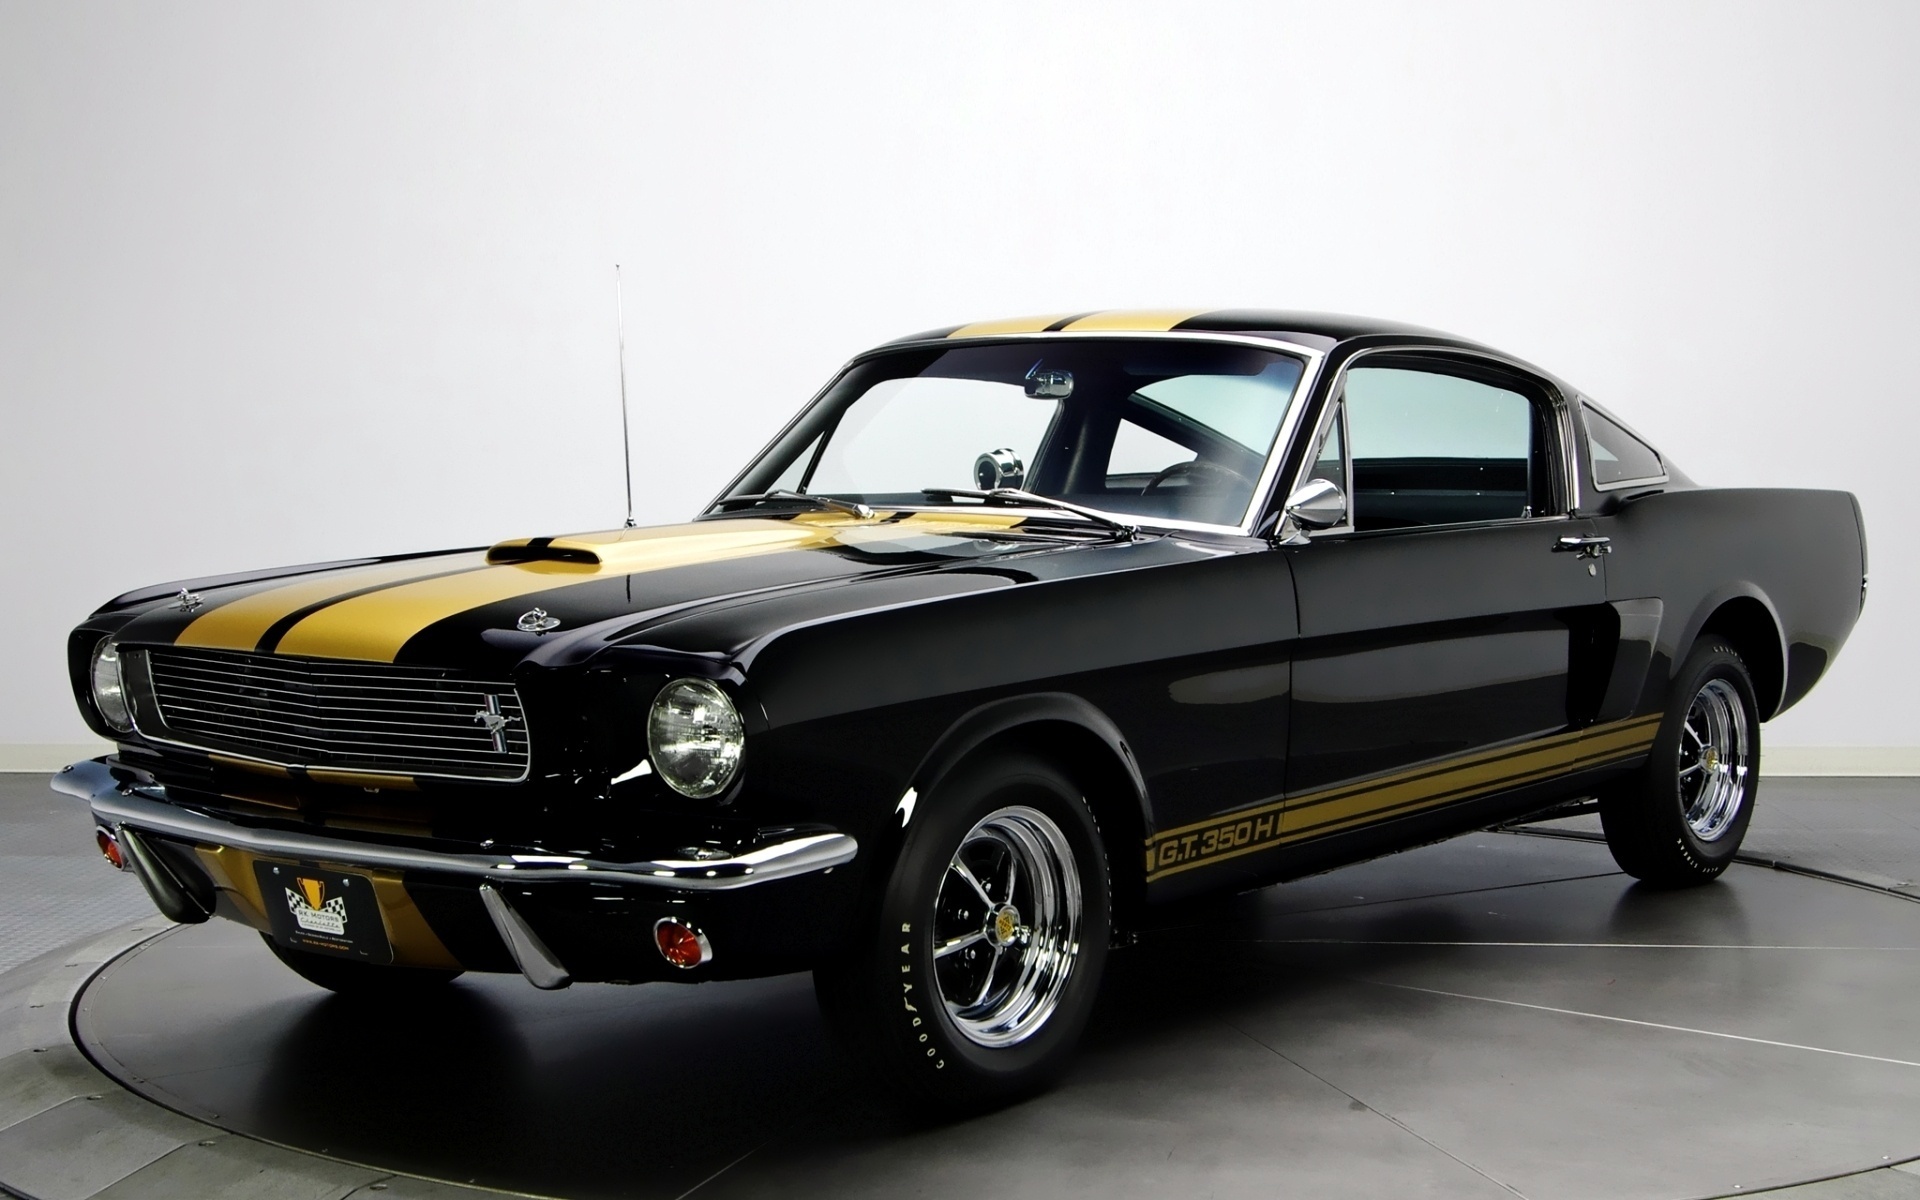 , , , , shelby, 1966, 350h, gt, Ford, mustang